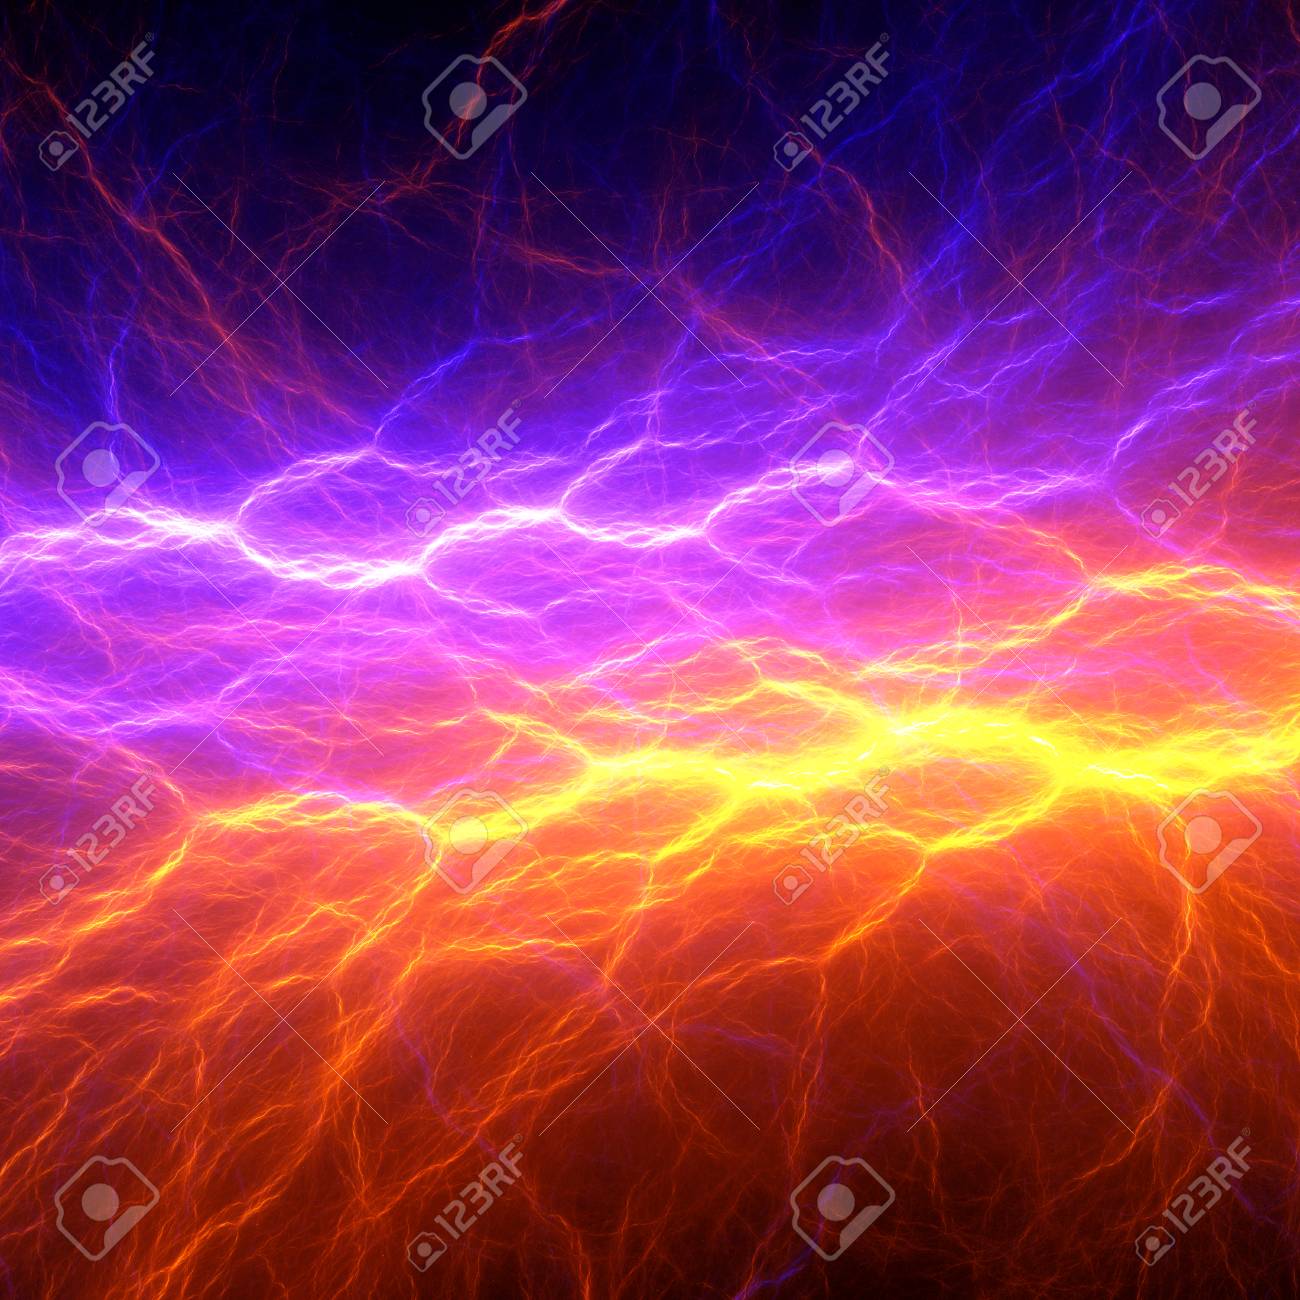 Orange And Purple Abstract Lightning Background Clash Of The